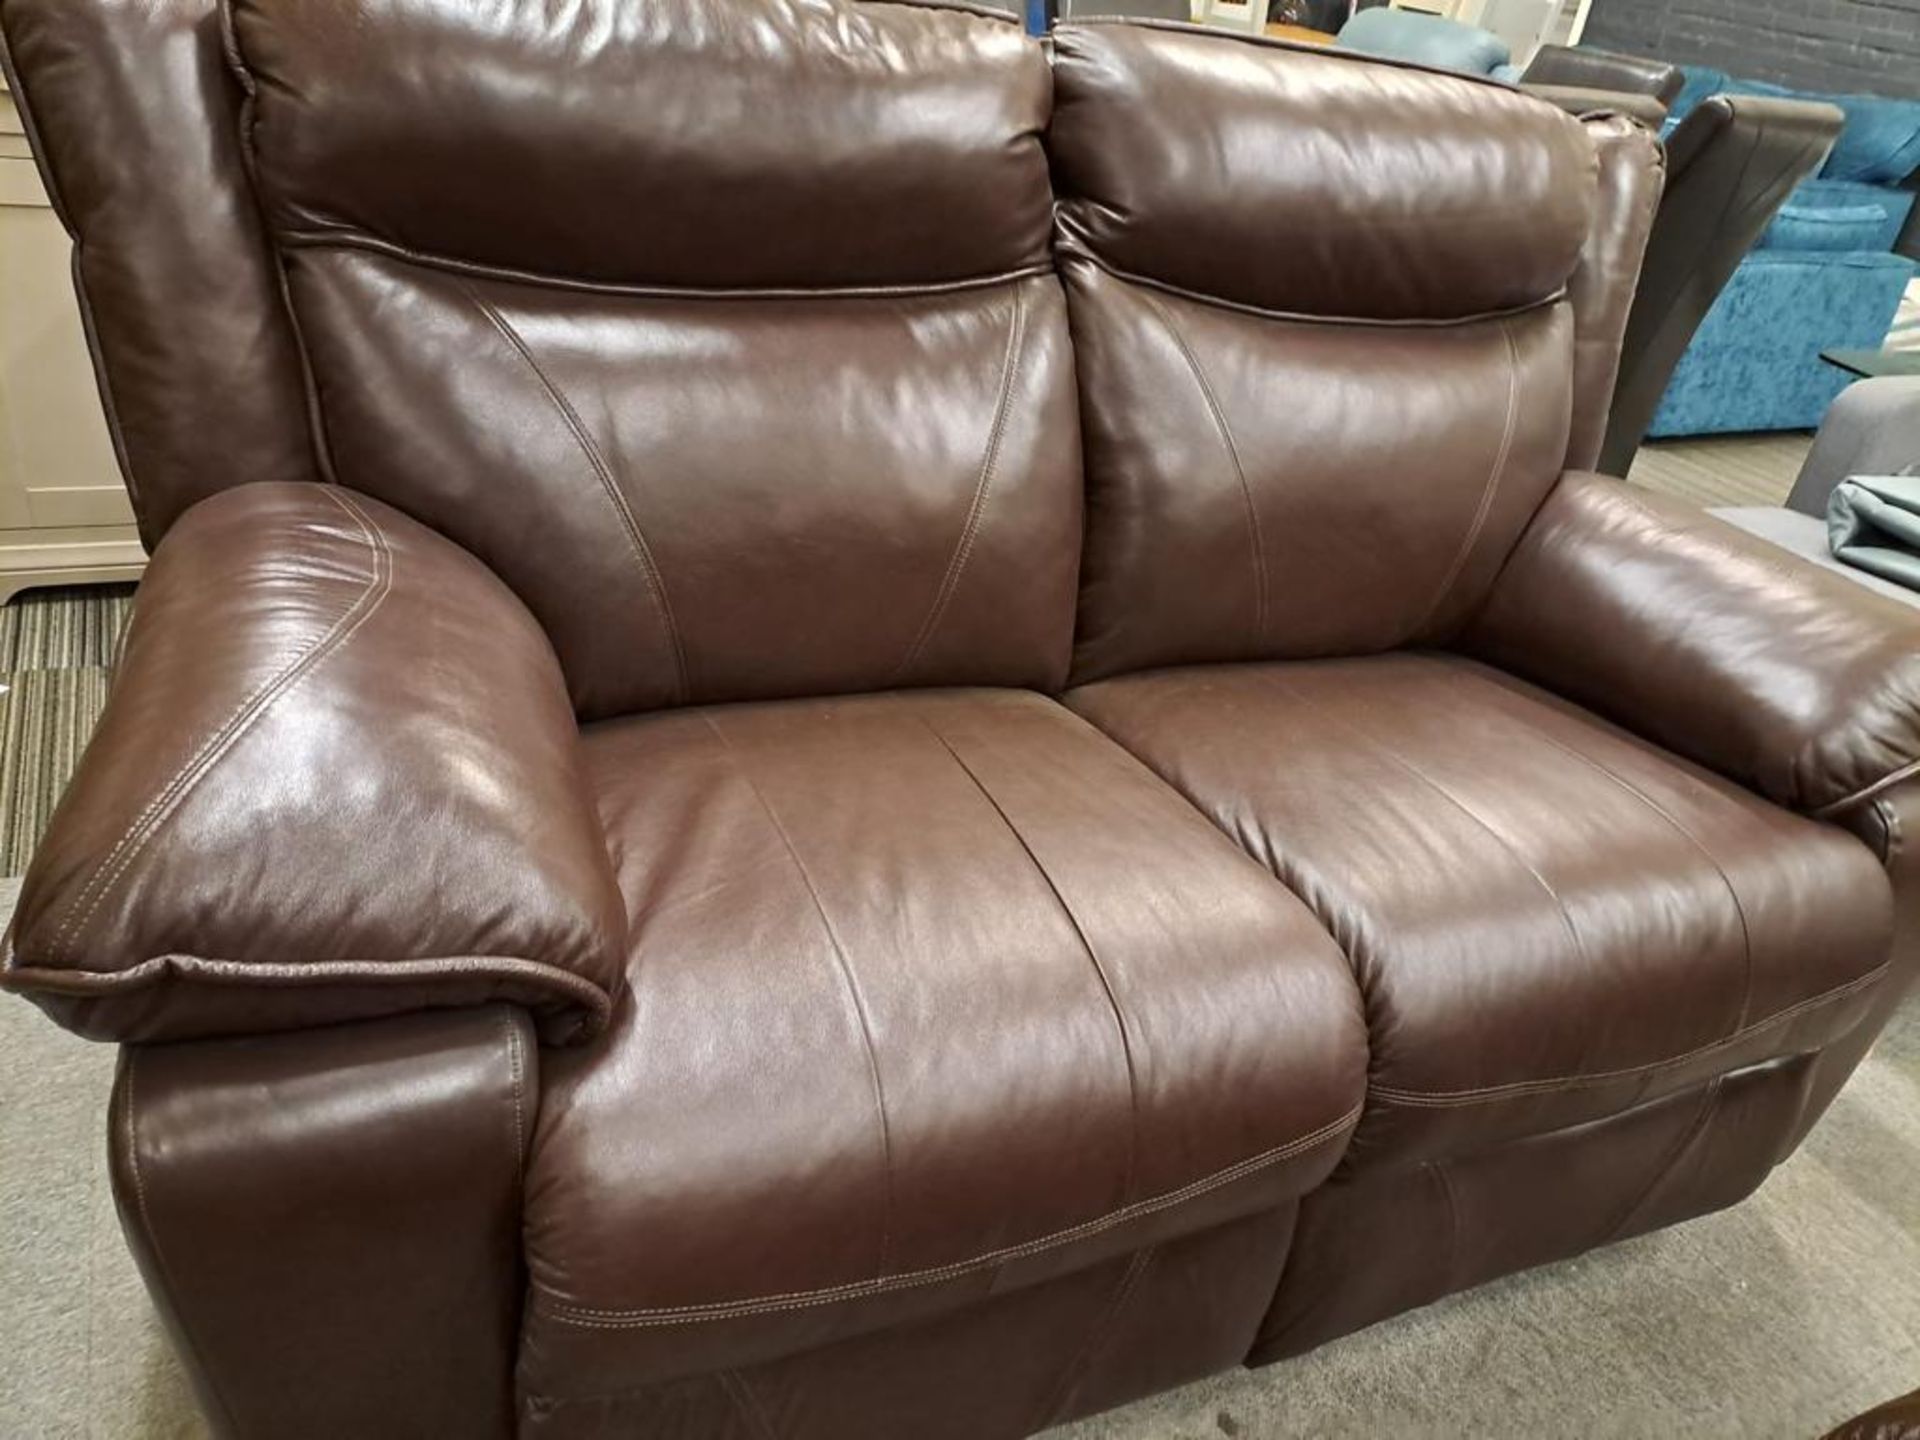 *EX DISPLAY* Santa fe 2 + 2 seater sofa in chocolate brown full leather. - Image 3 of 8